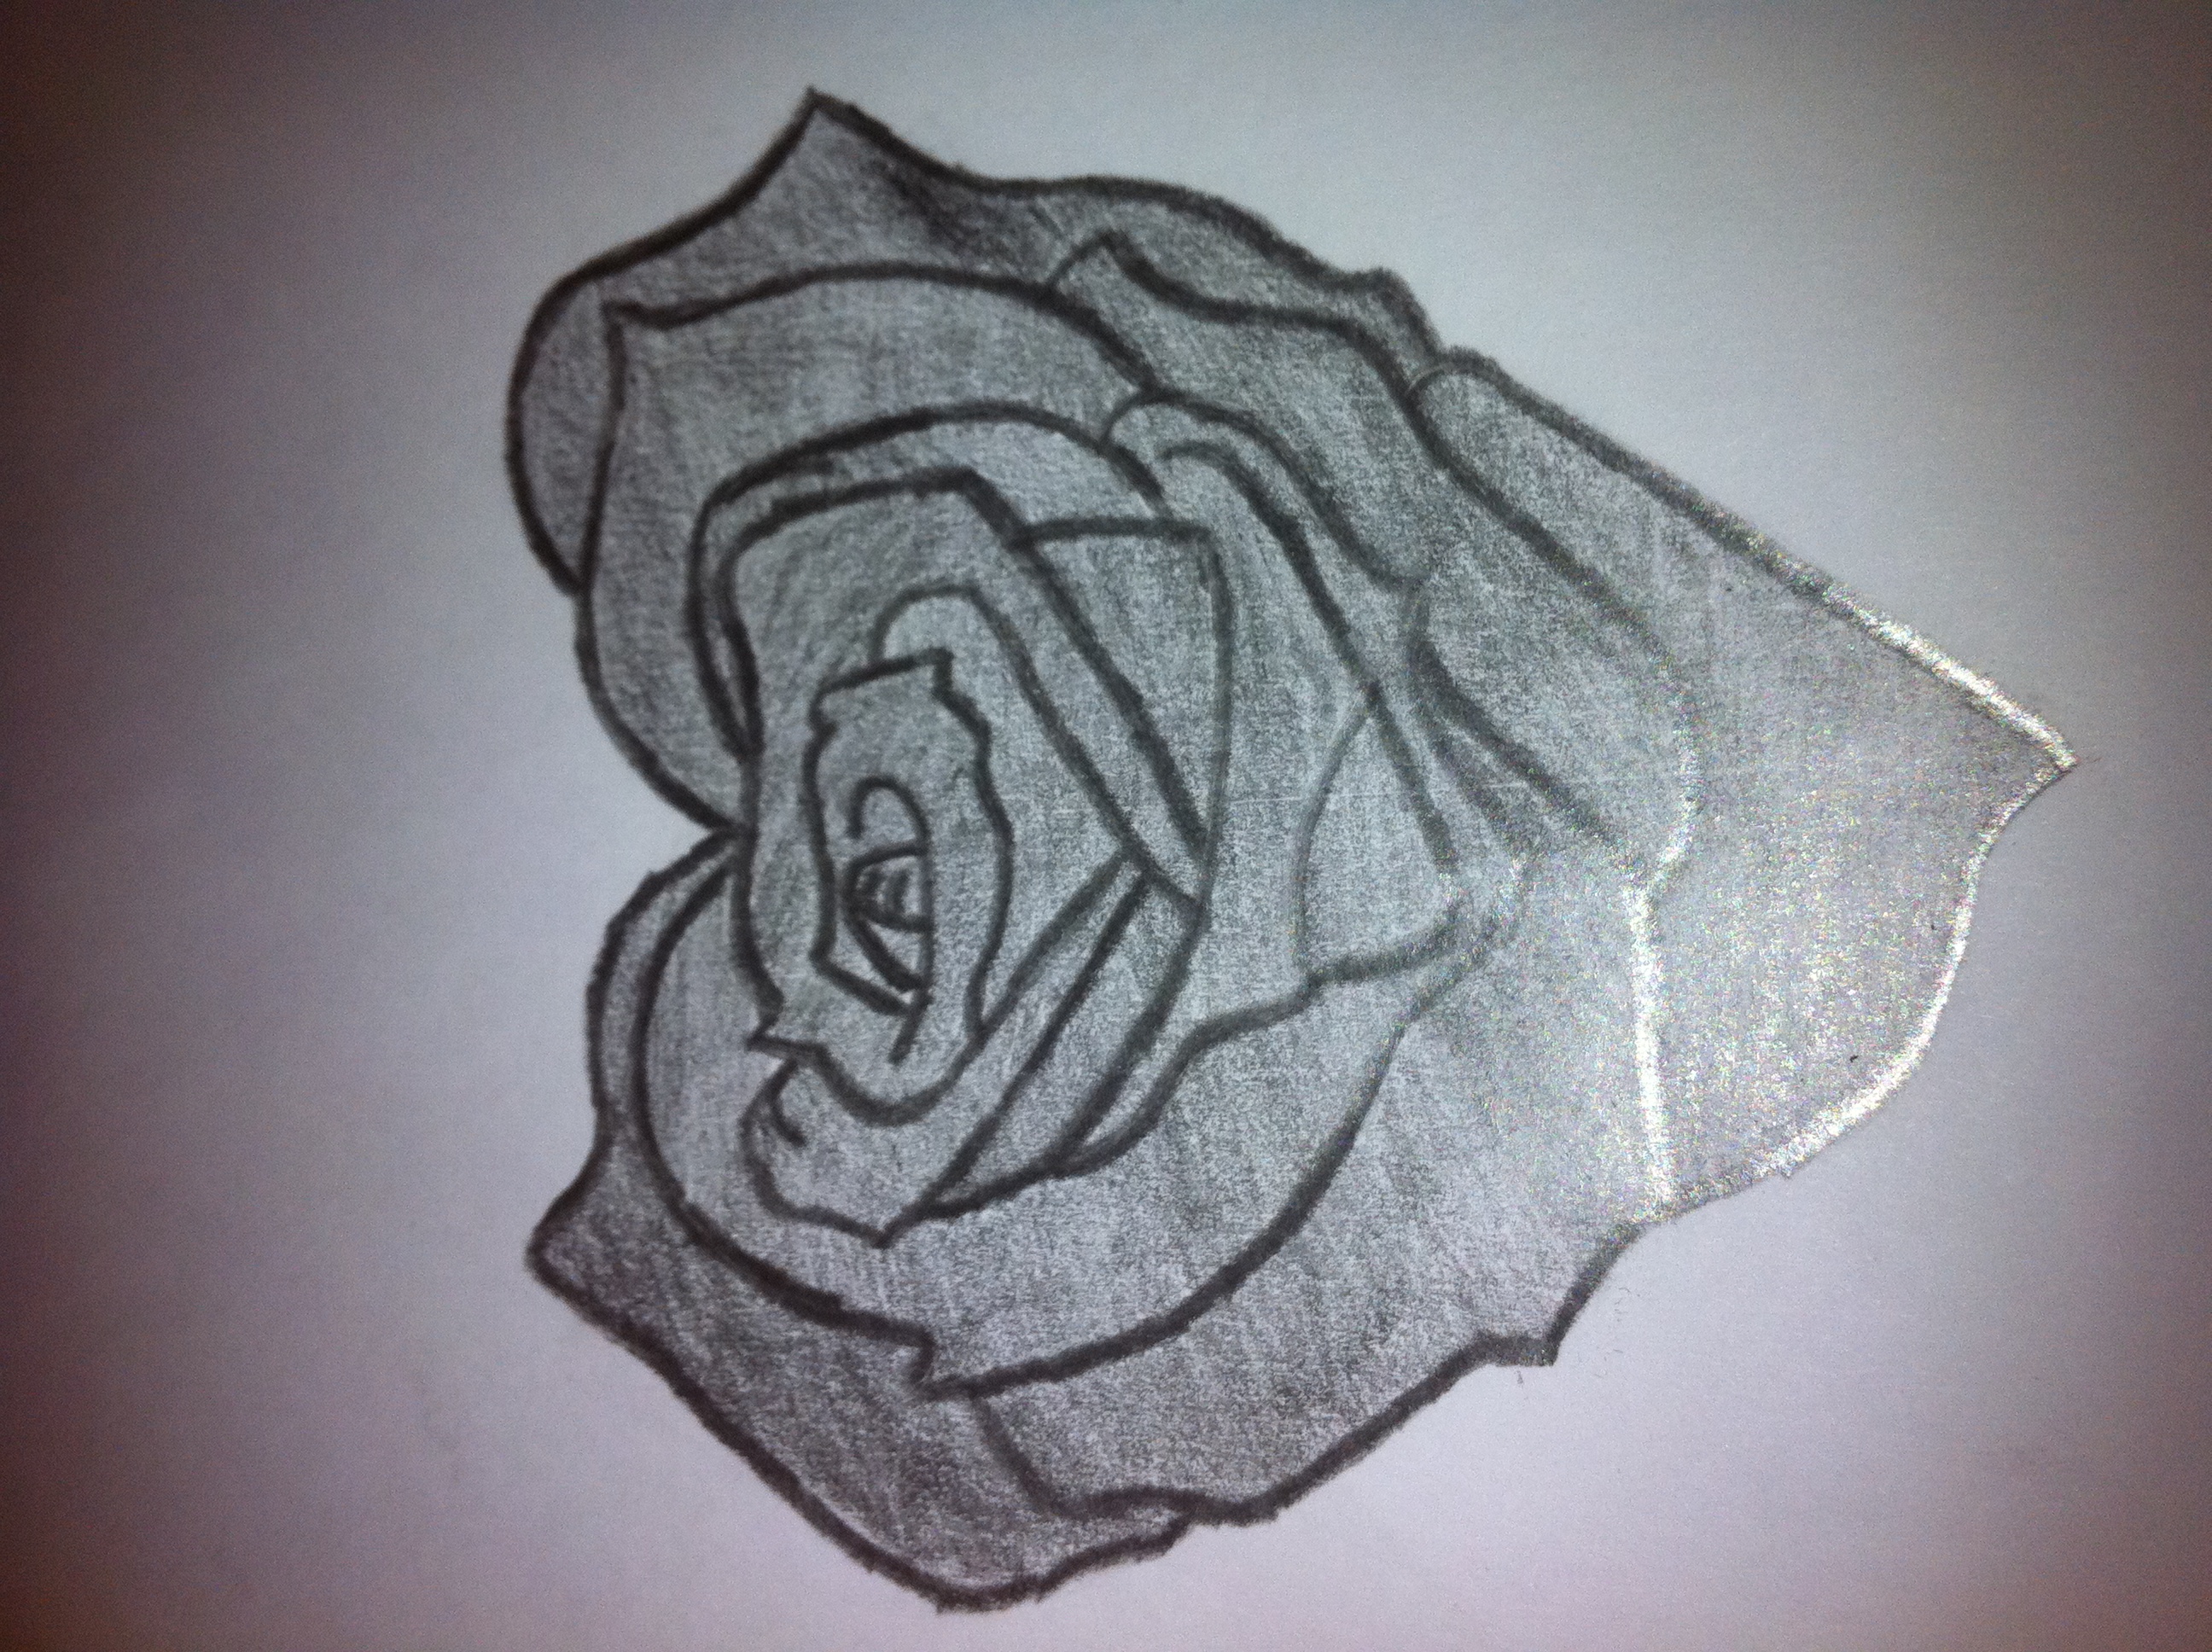 Pencil Drawings Of Roses And Crosses